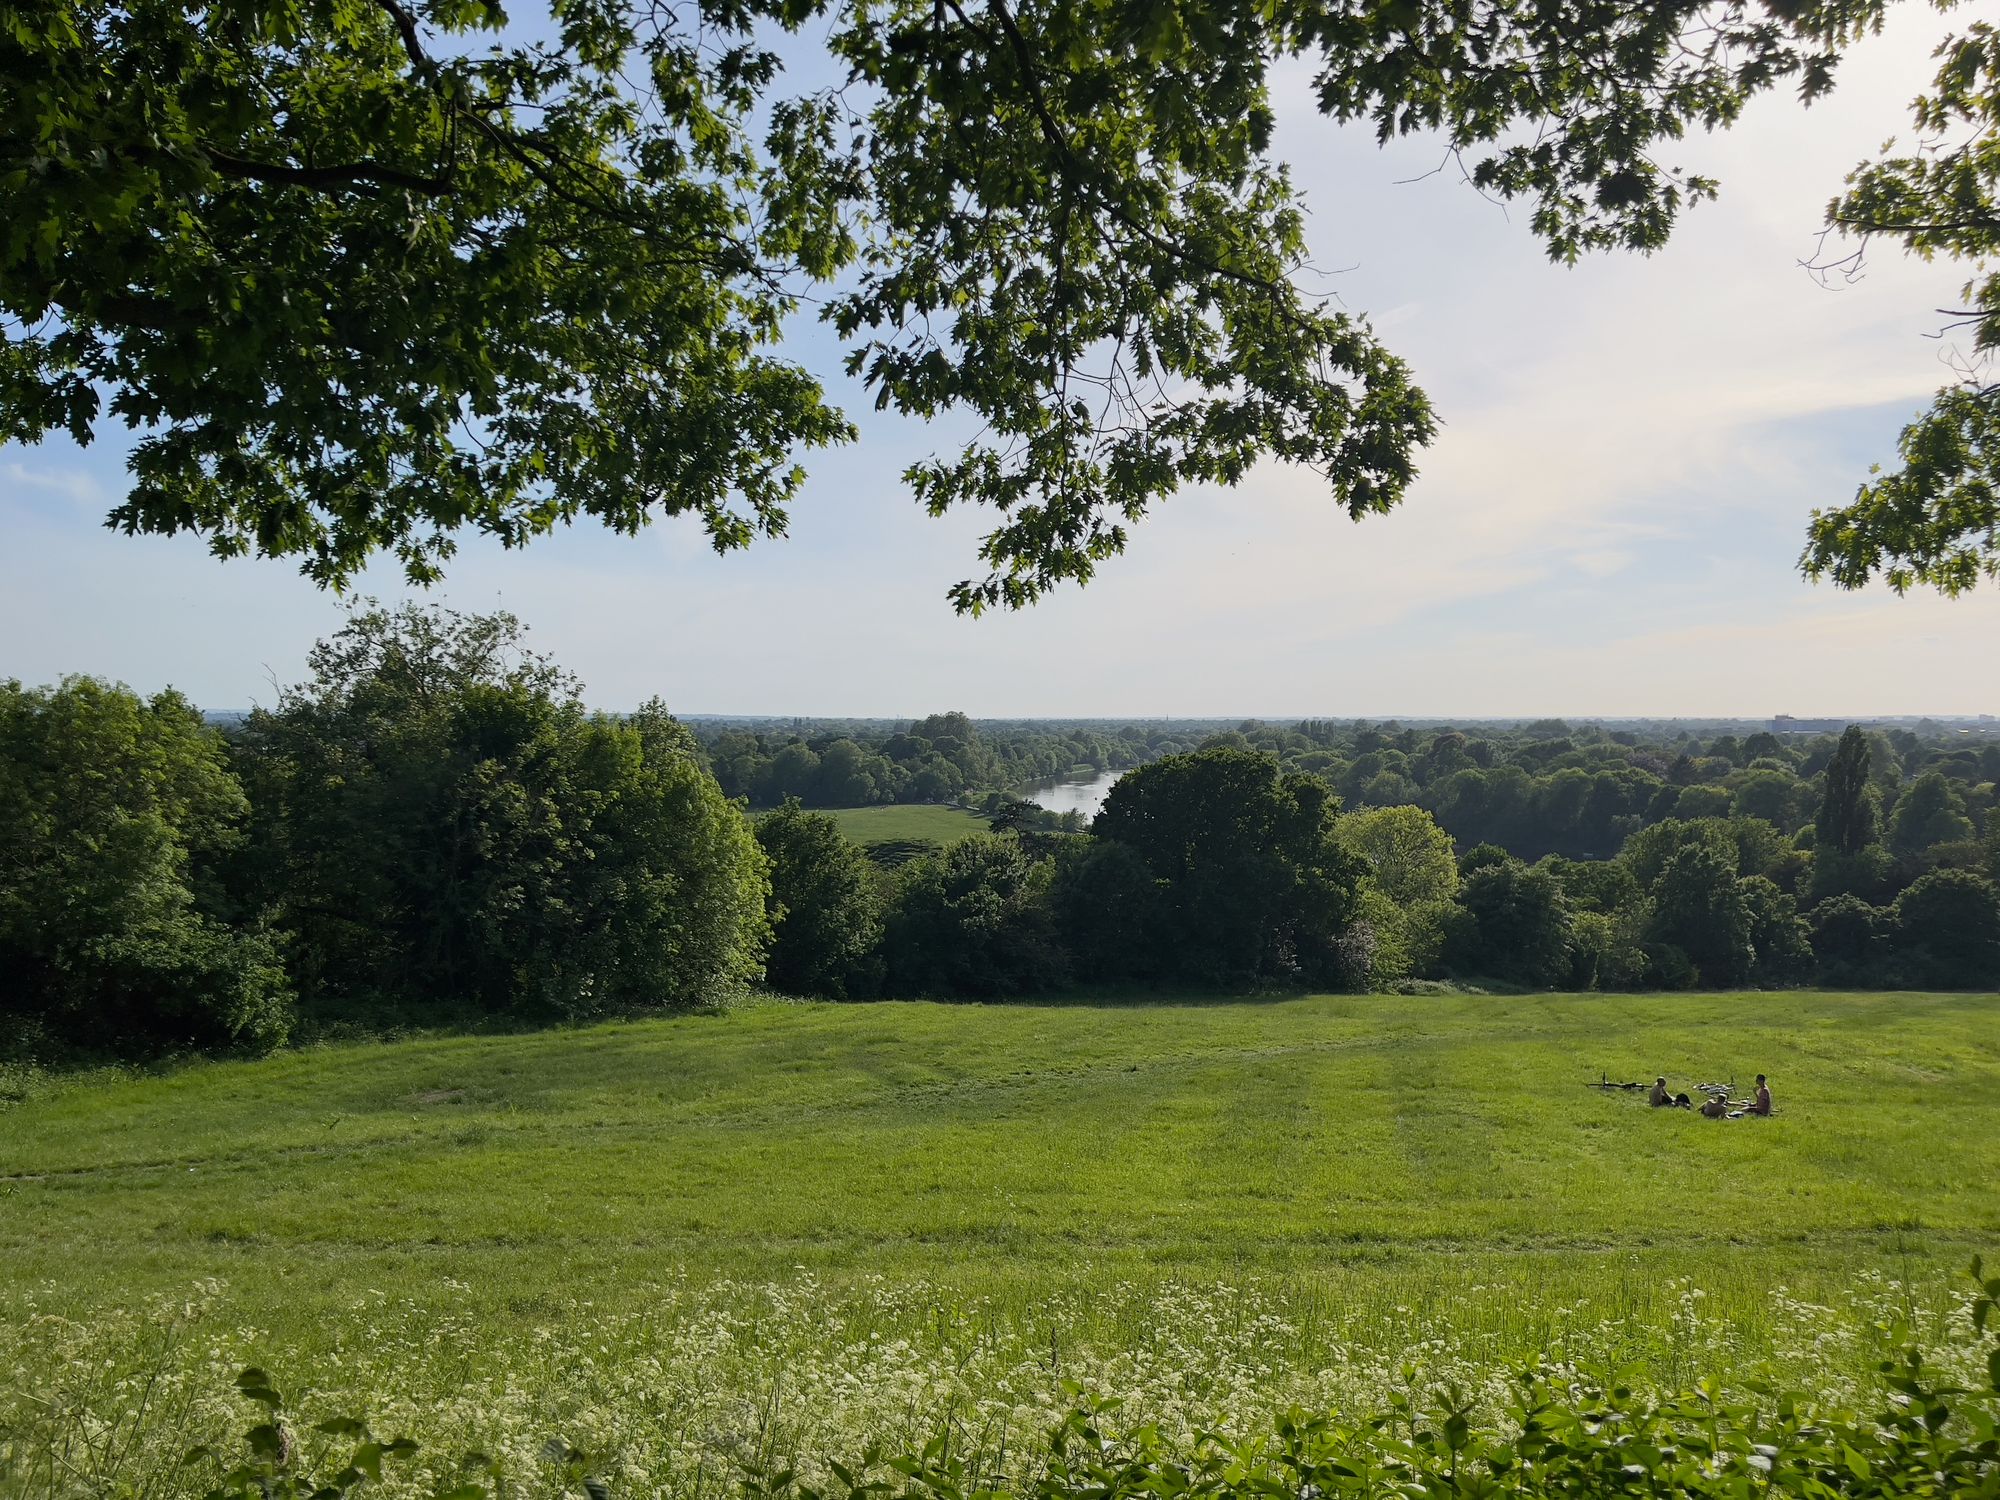 View over fields and trees including a bend of the River Thames. Three men sit on the grass enjoying a picnic with their bicycles on the ground beside them.